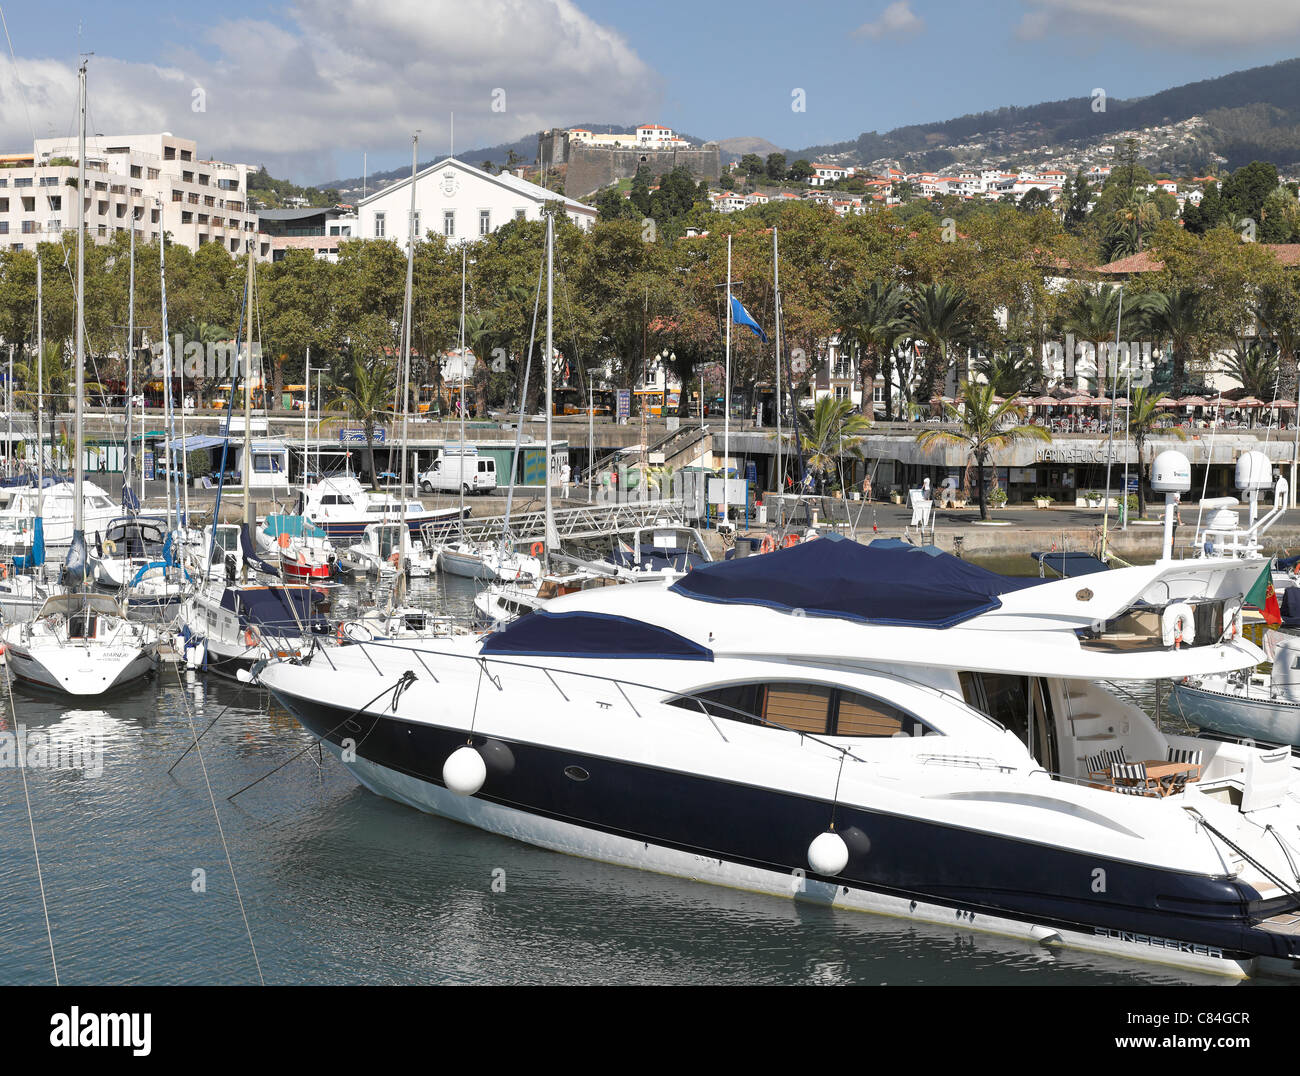 Luxury sunseeker boat boats in the marina Funchal harbour Funchal Madeira Portugal EU Europe Stock Photo